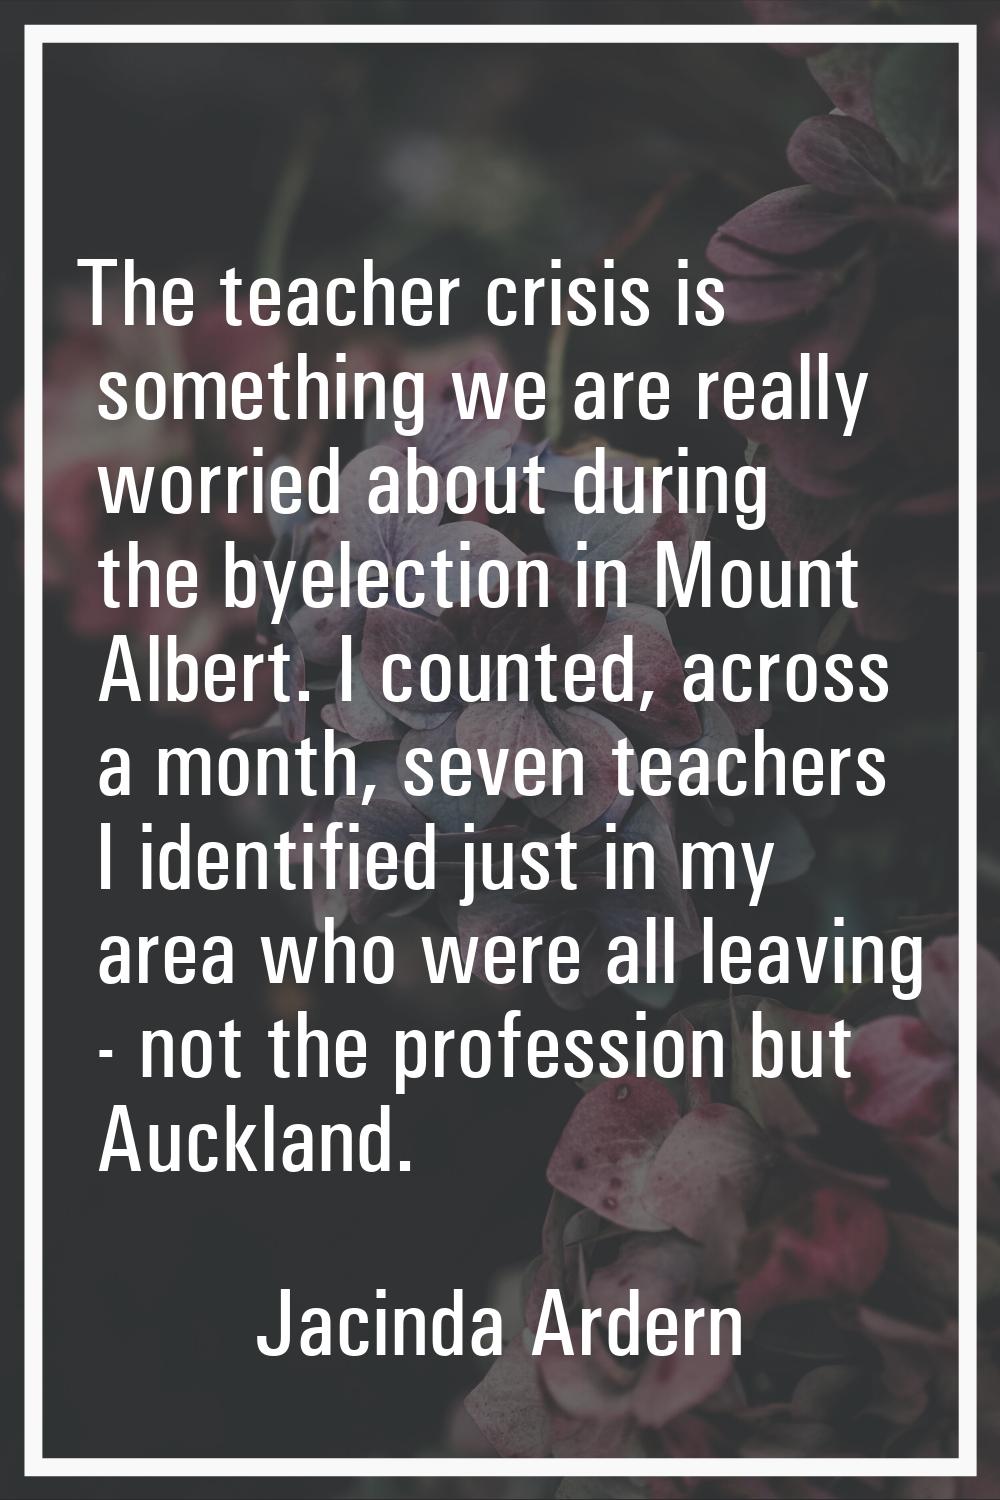 The teacher crisis is something we are really worried about during the byelection in Mount Albert. 